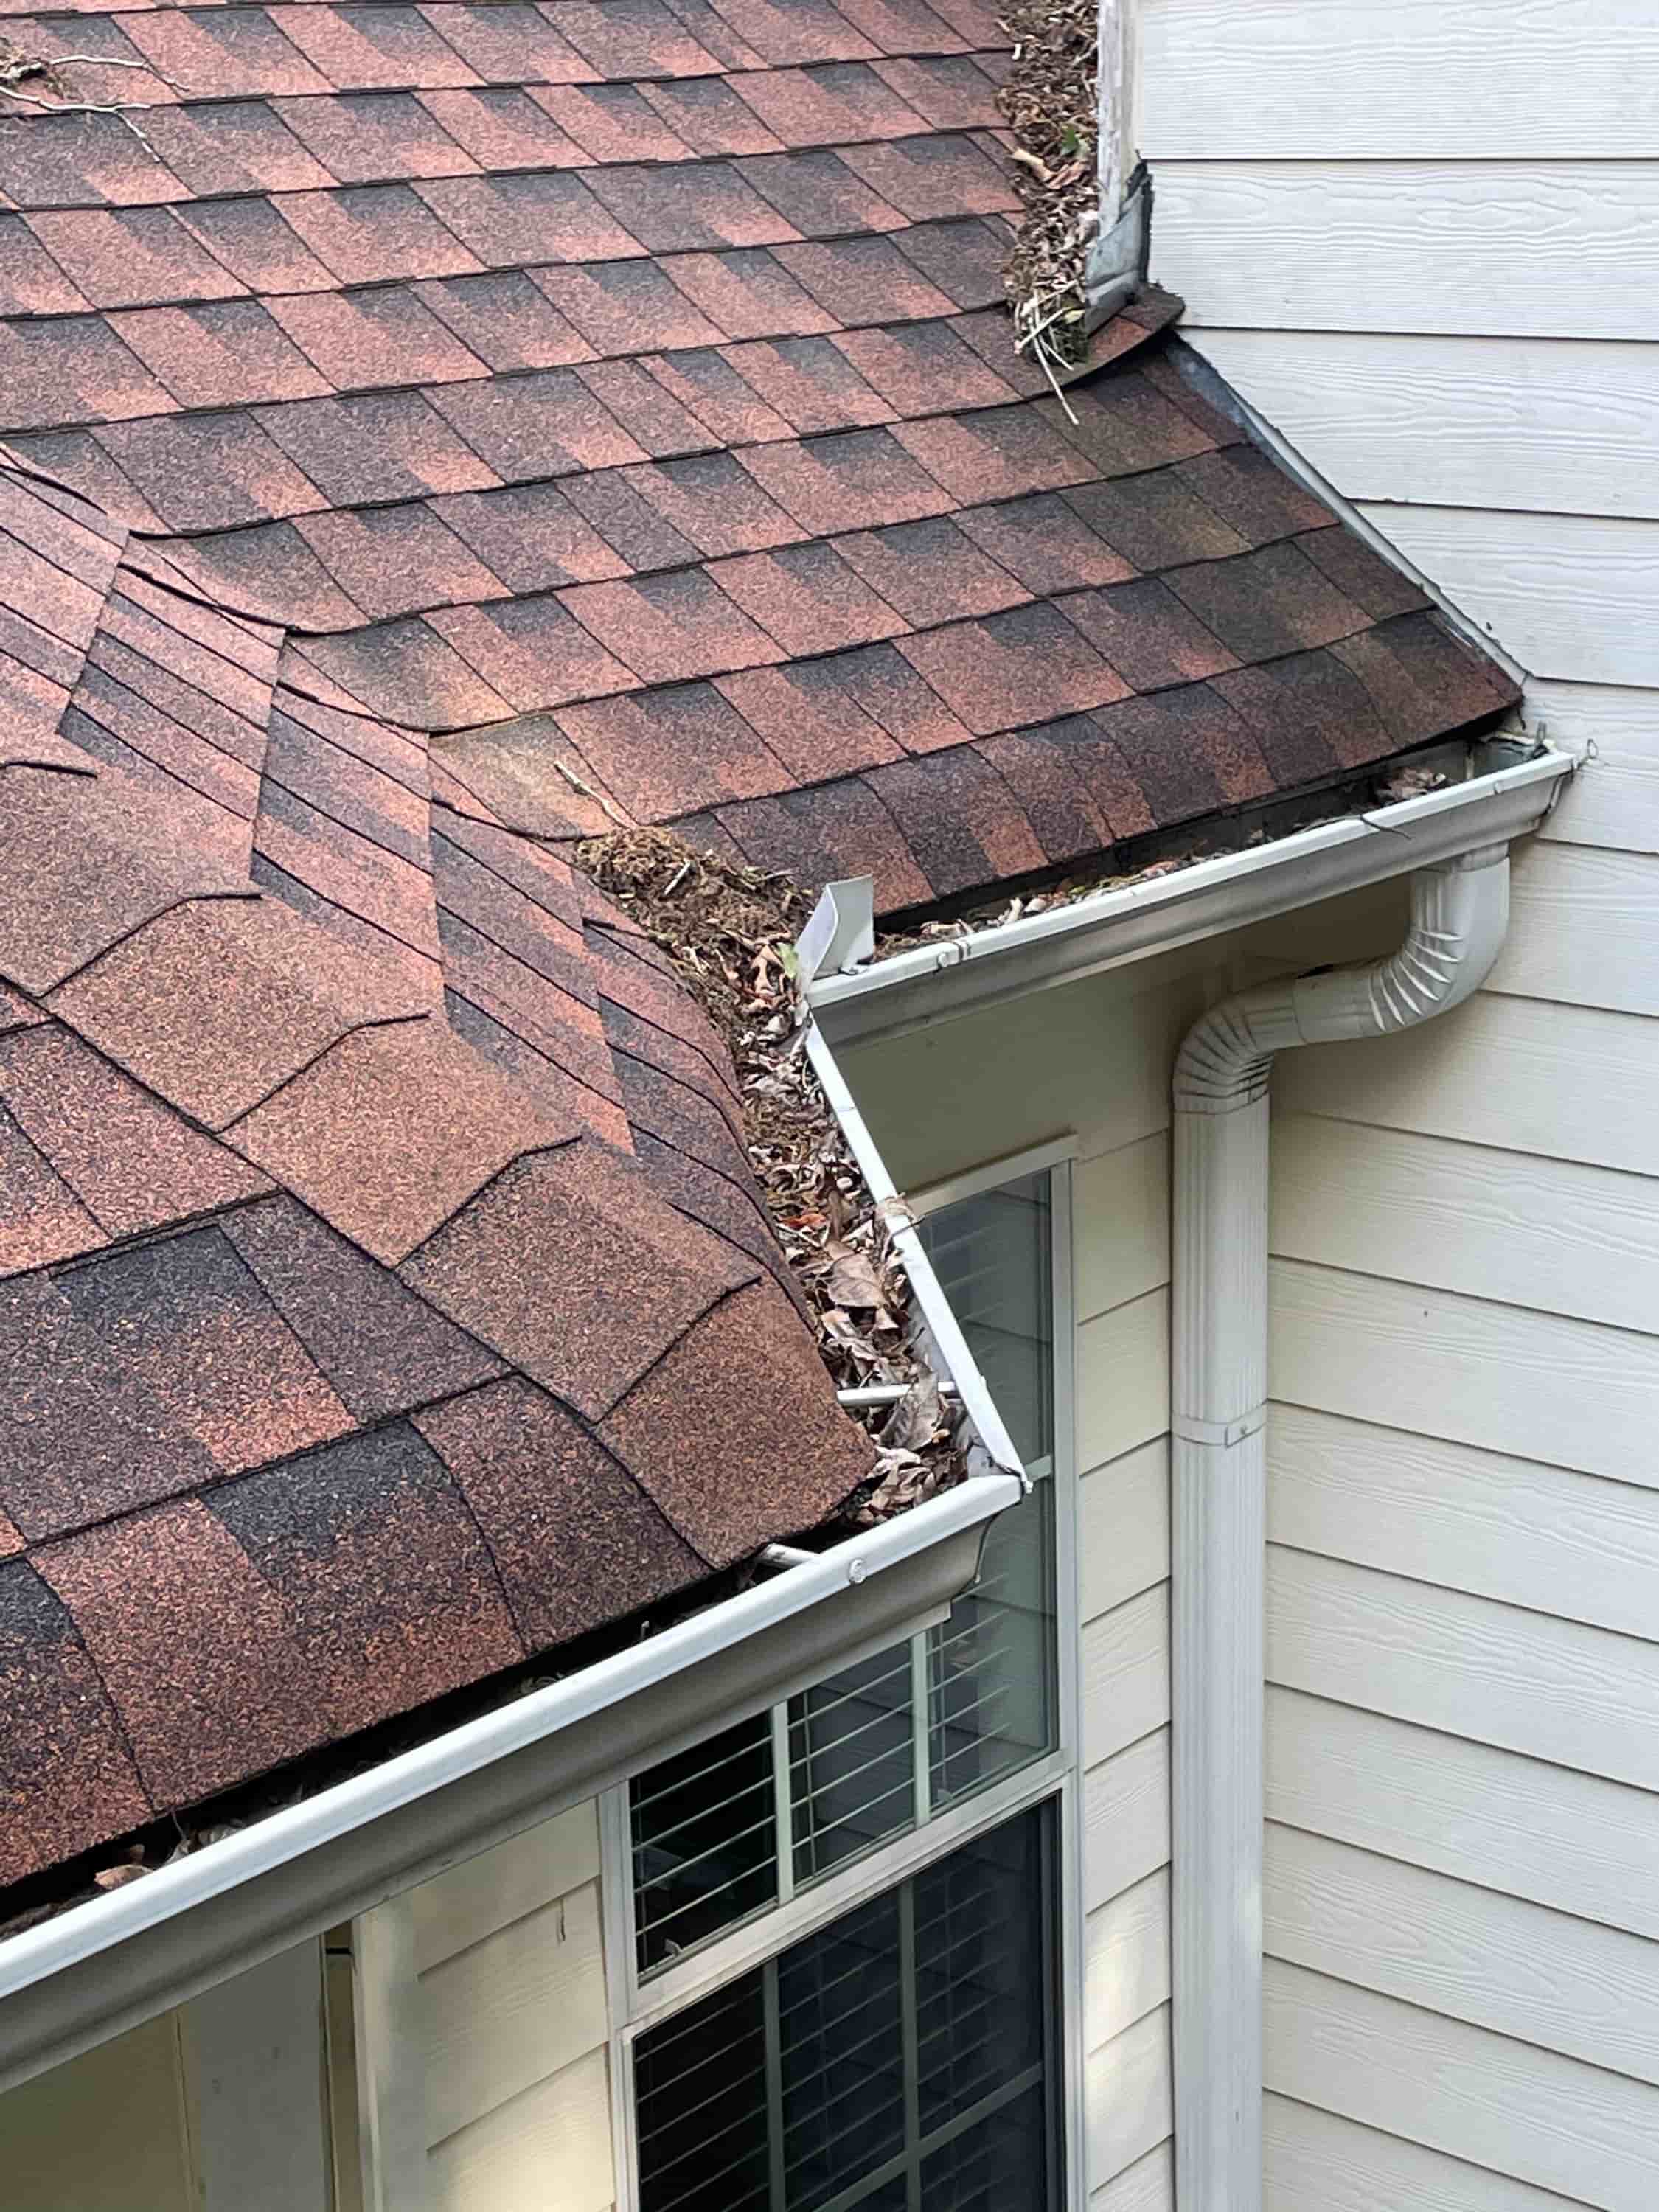 cleaning out gutters tips